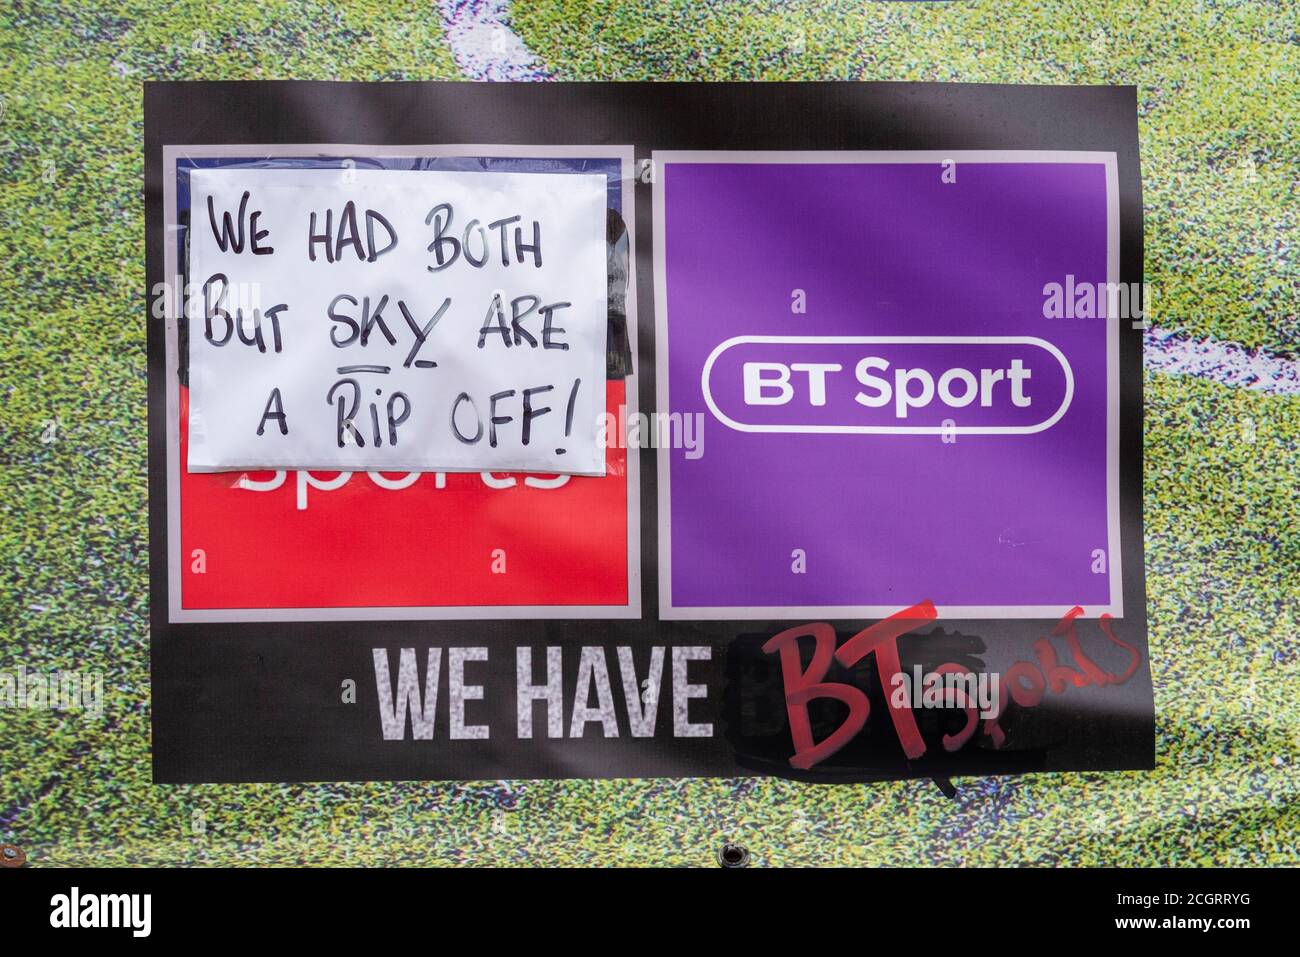 Abusive sign outside pub in Southend on Sea, accusing Sky television of being a rip off. Advertising BT Sport TV coverage for customers to watch Stock Photo